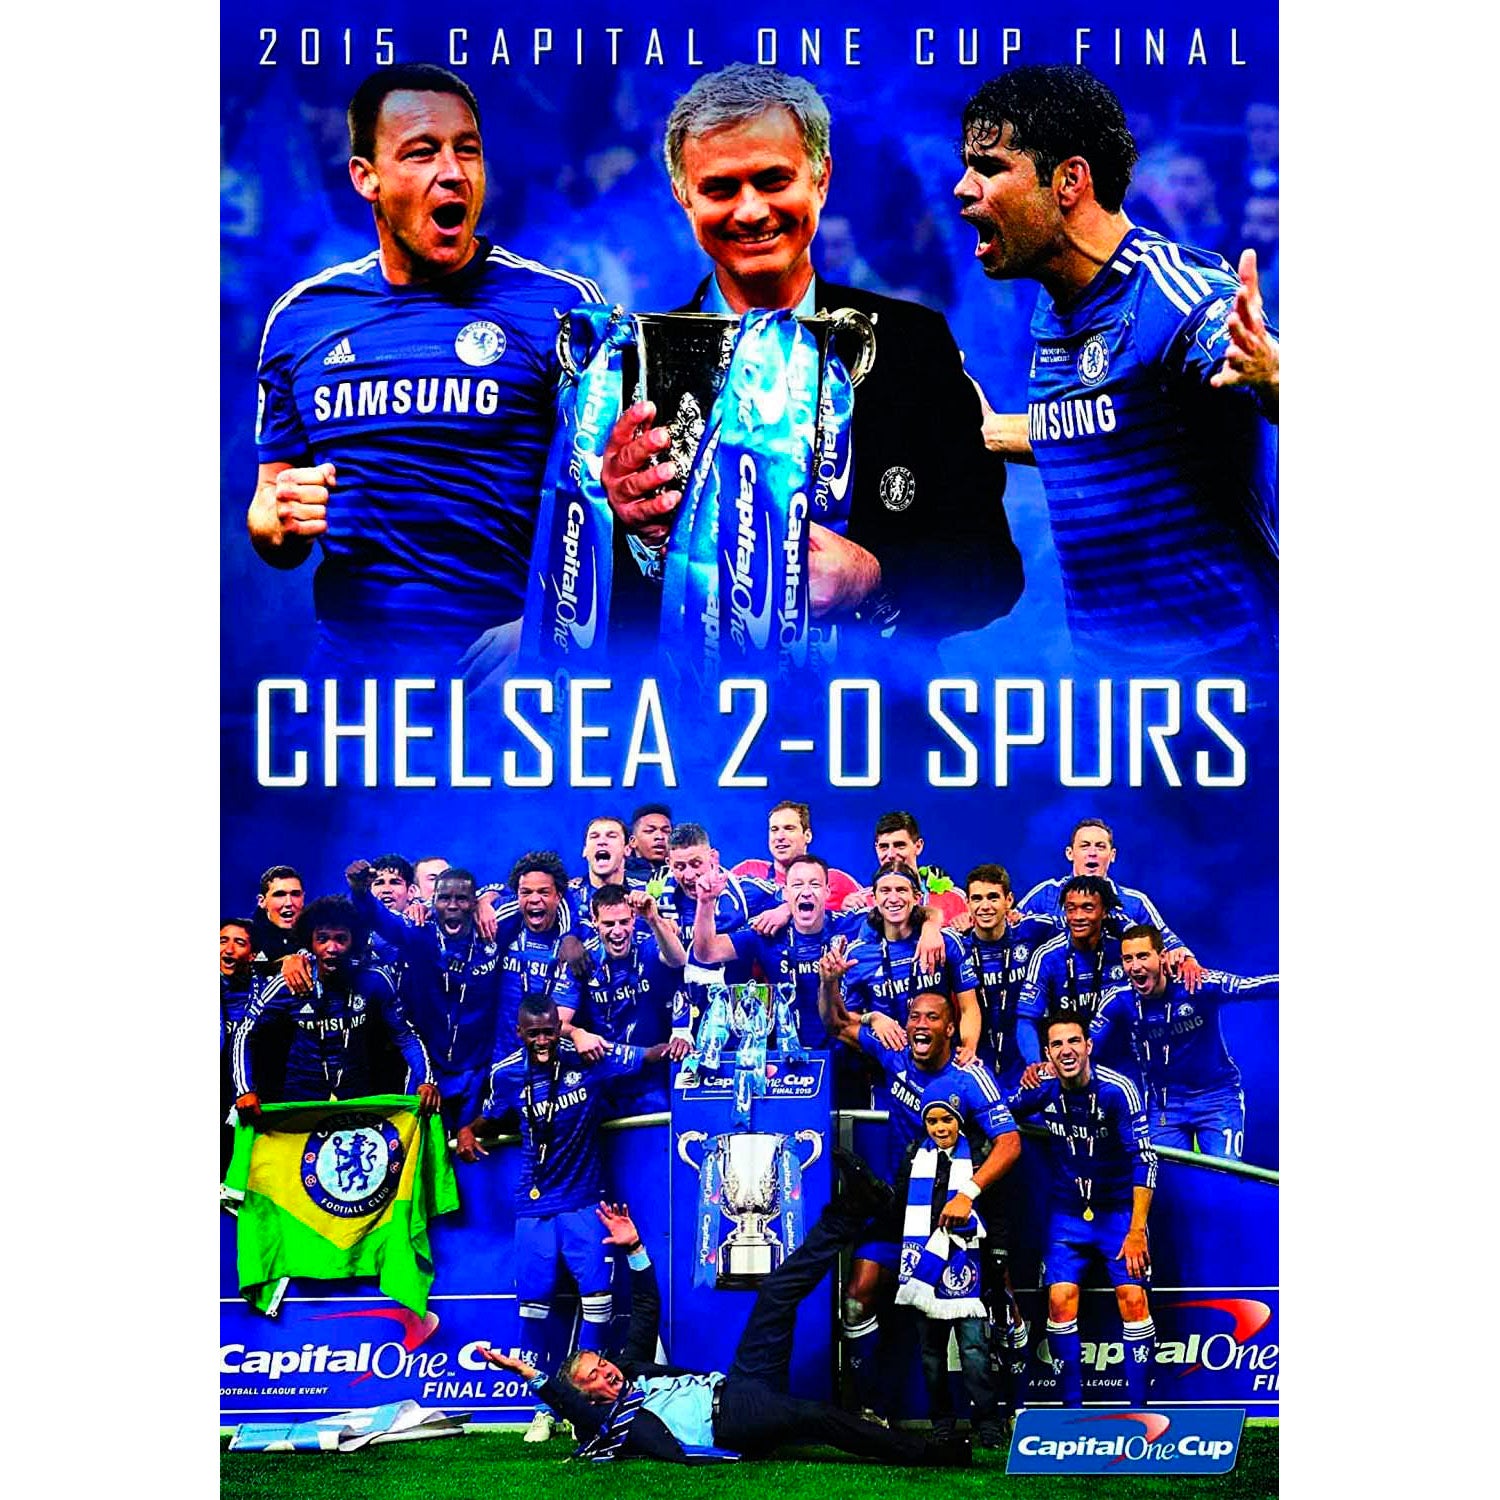 2015 Capital One Cup Final – Chelsea 2-0 Spurs